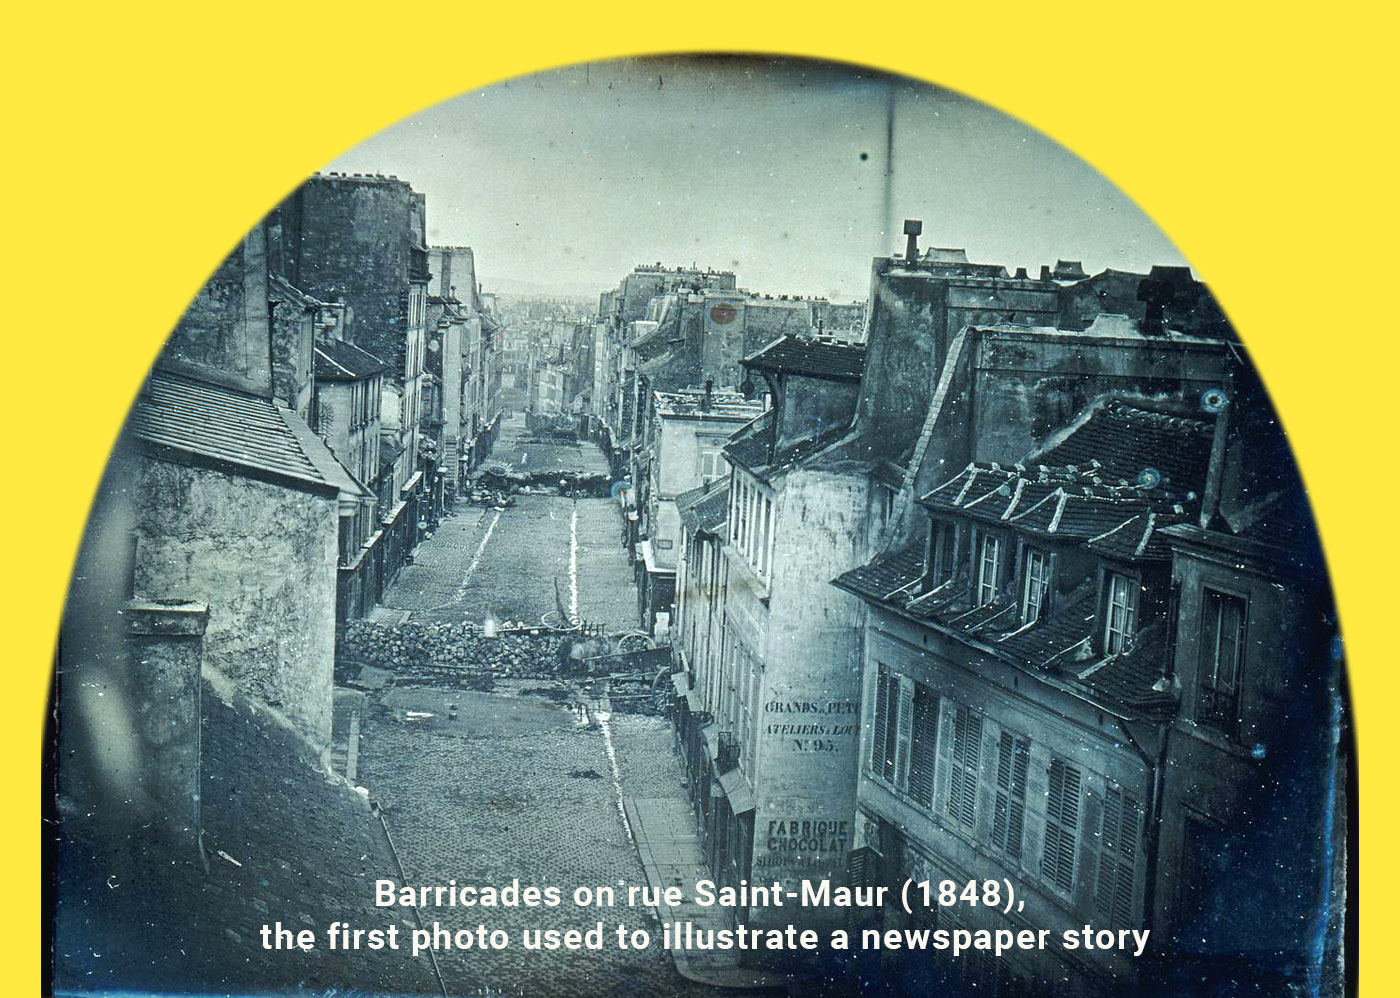 Barricades on rue Saint-Maur (1848), the first photo used to illustrate a newspaper story